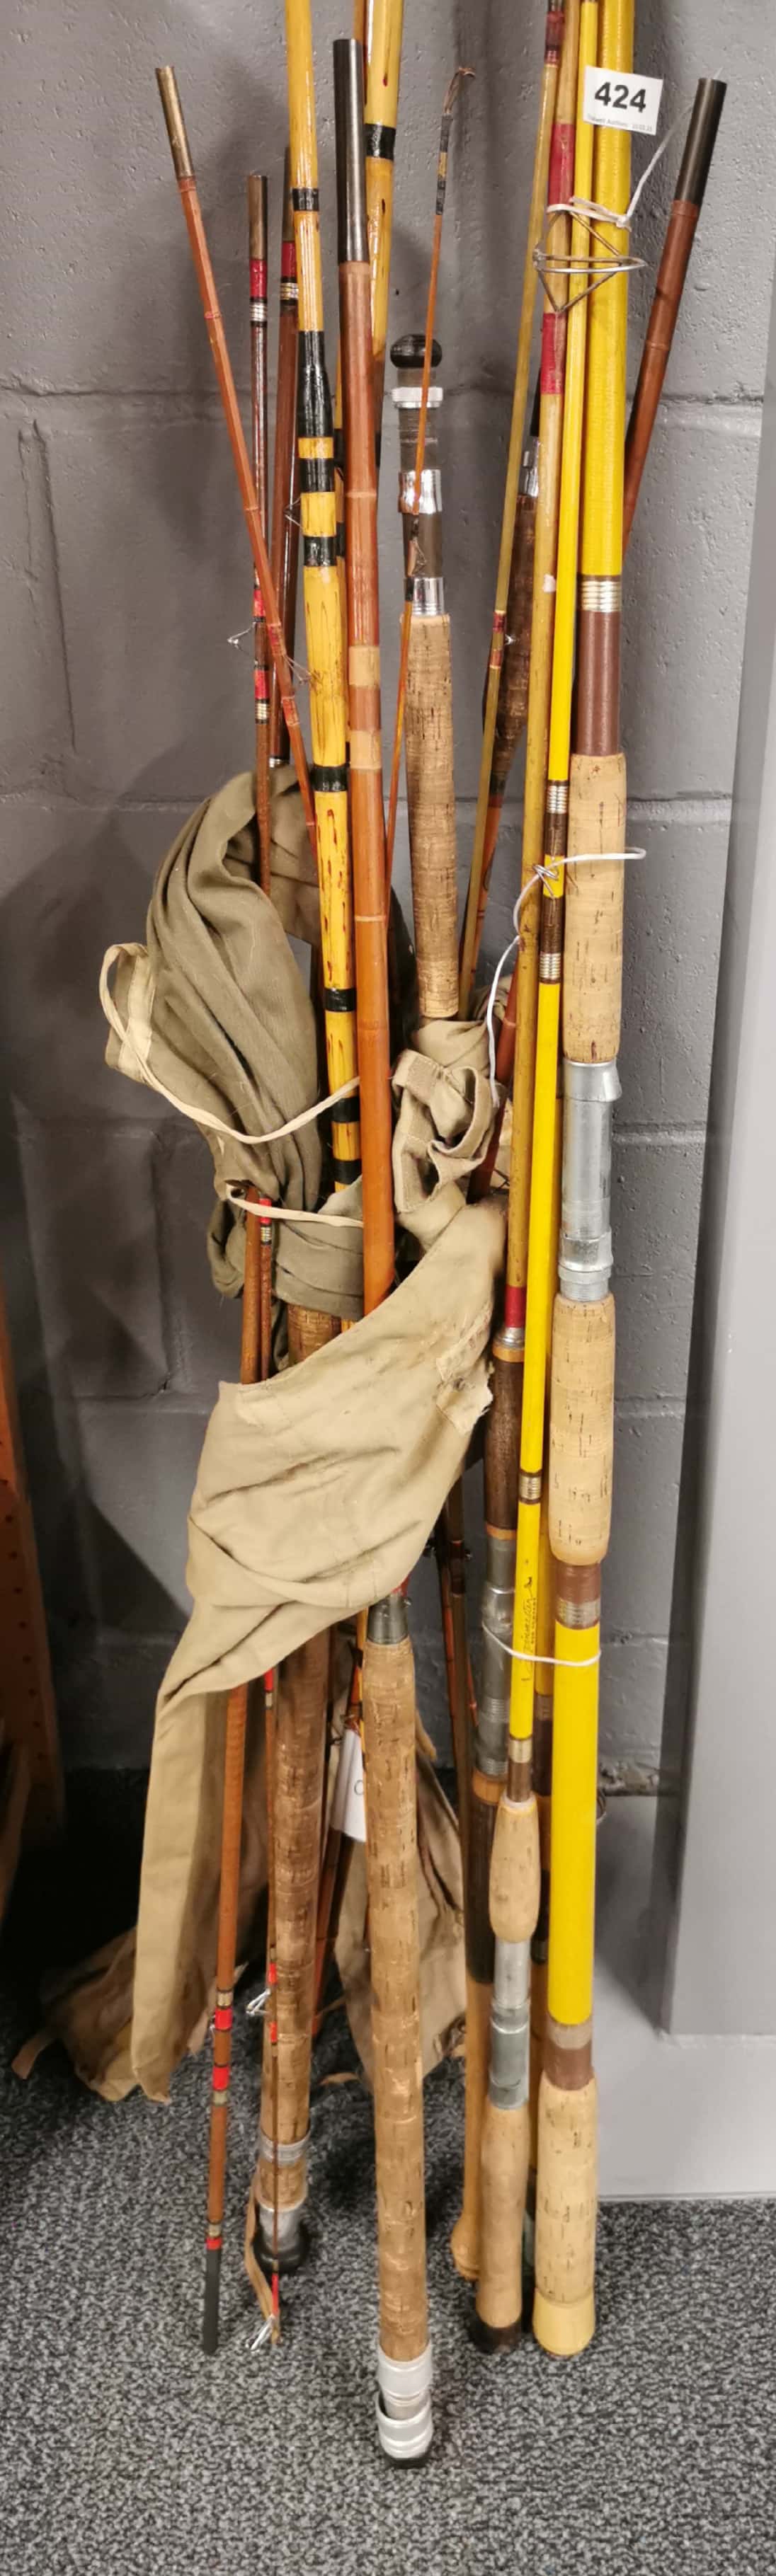 A collection of vintage fishing rods. - Image 2 of 2